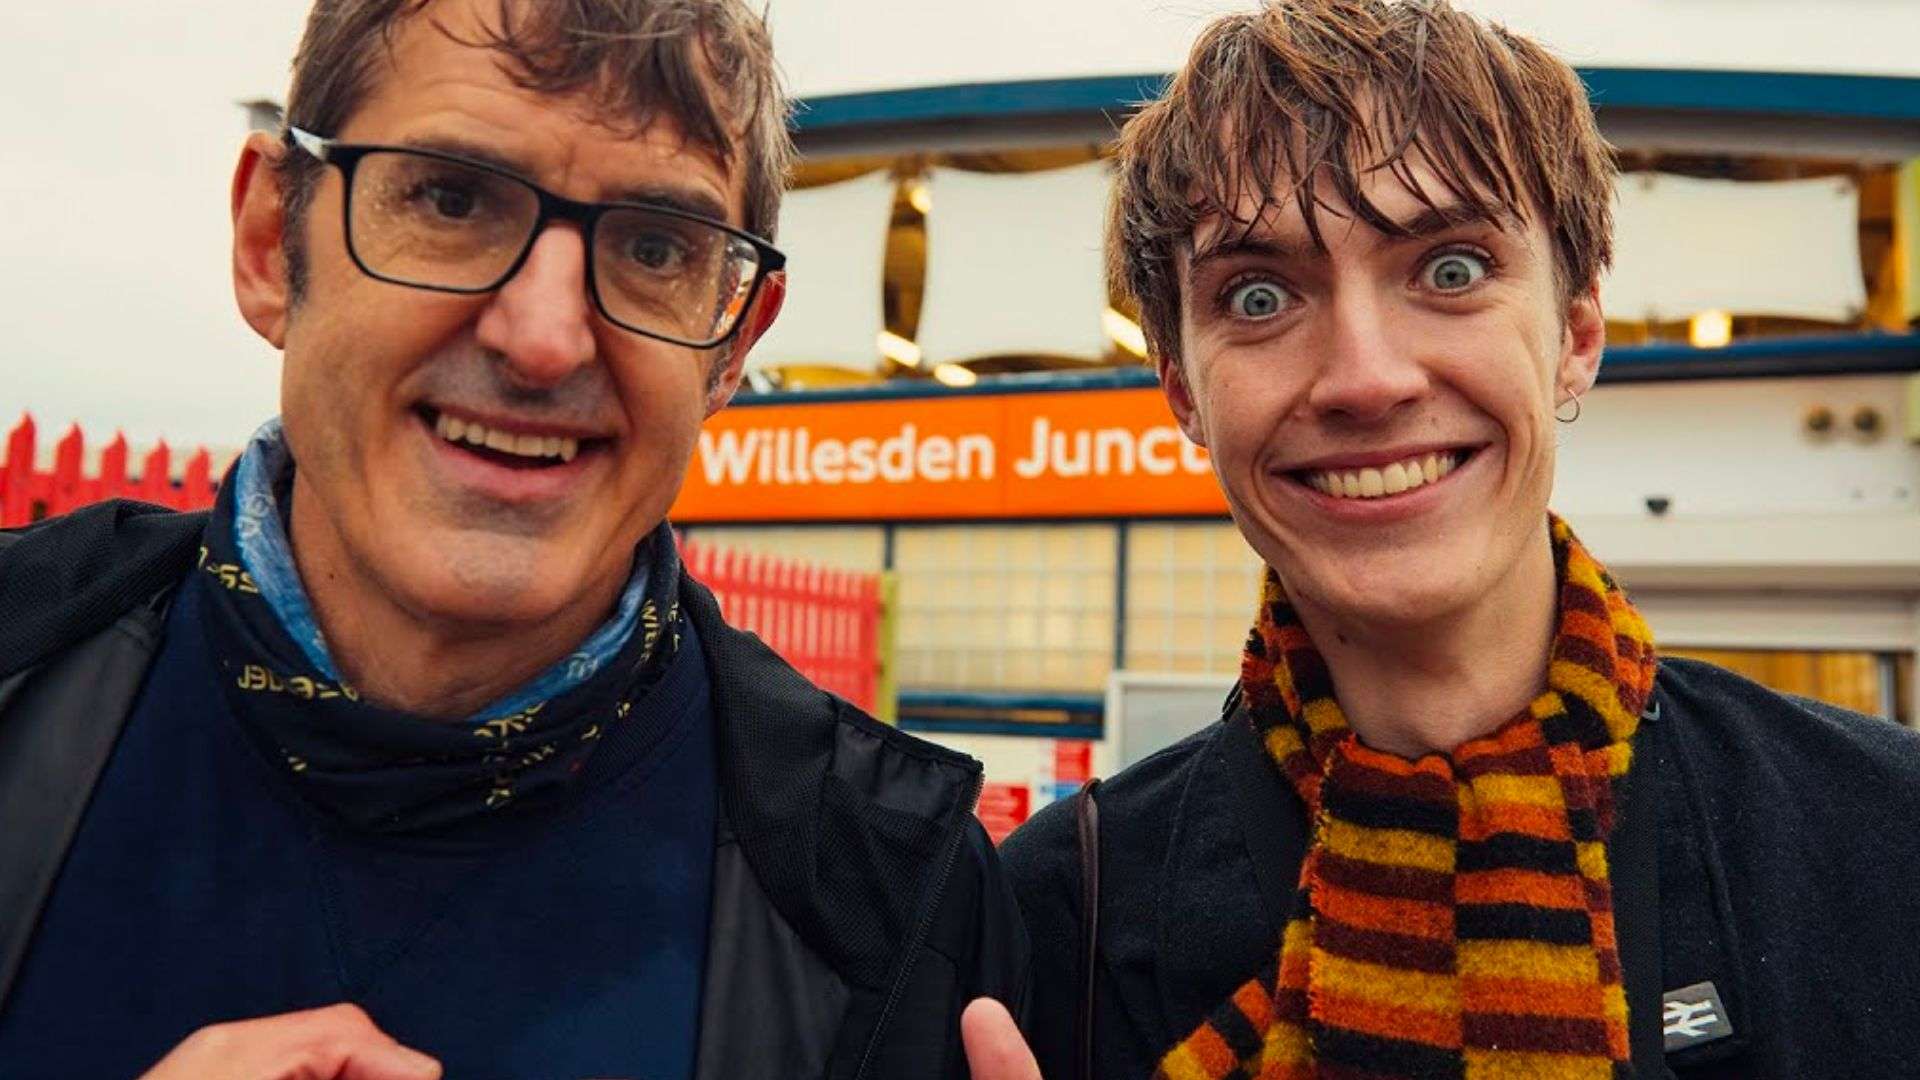 Francis Bourgeois and Louis Theroux outside train station smiling covered in rain